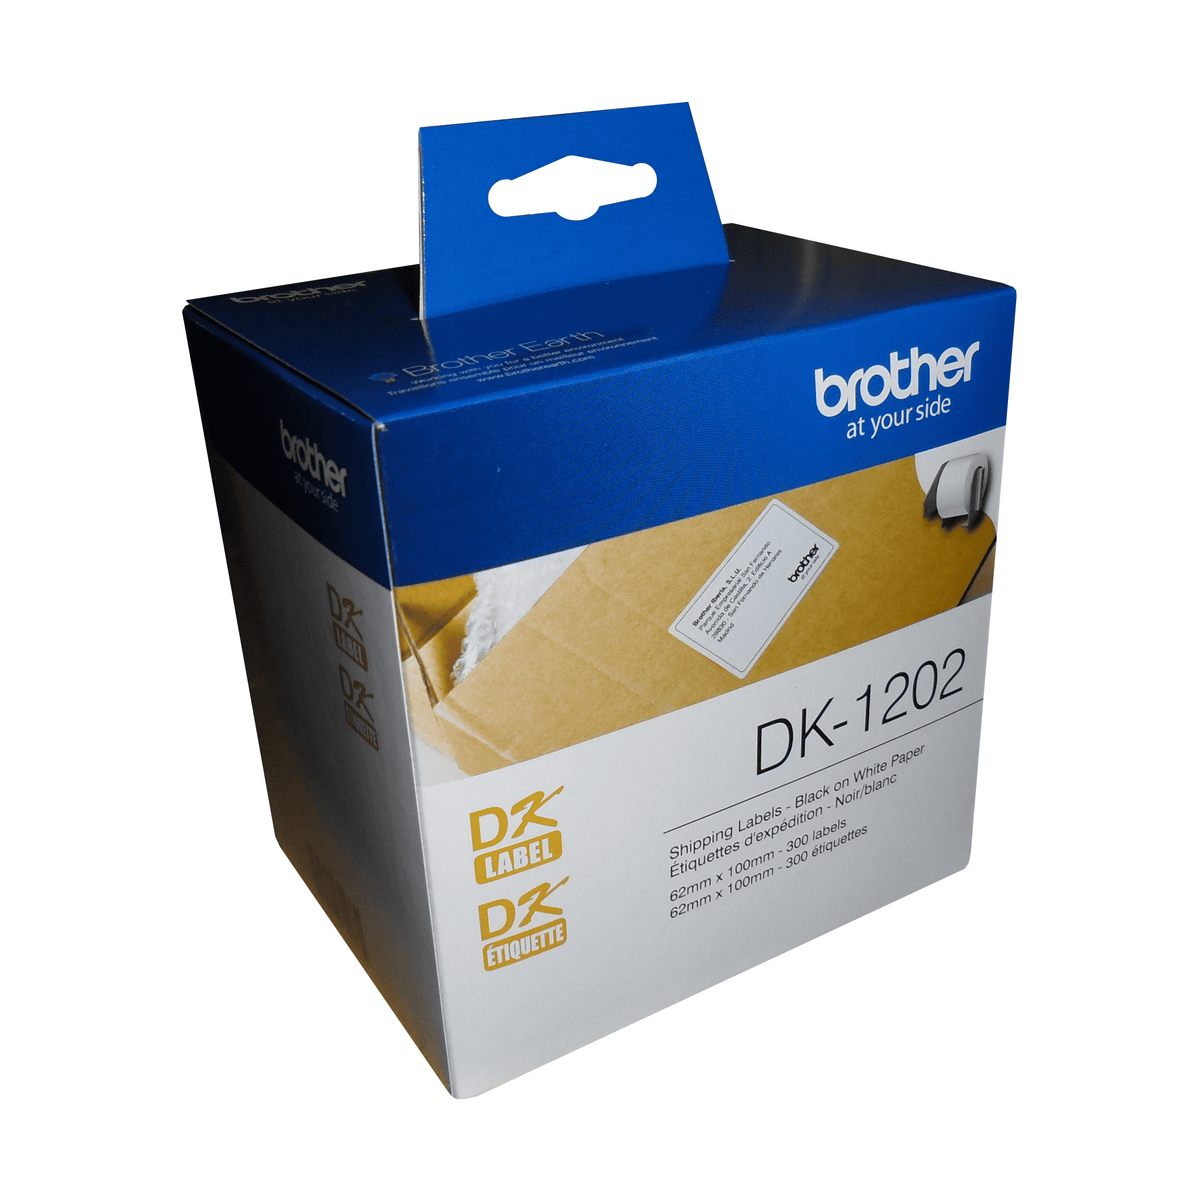 Brother DK-1202 White Shipping Paper Labels (300 Labels) - 2.4" x 3.9" (62 mm x 100 mm)